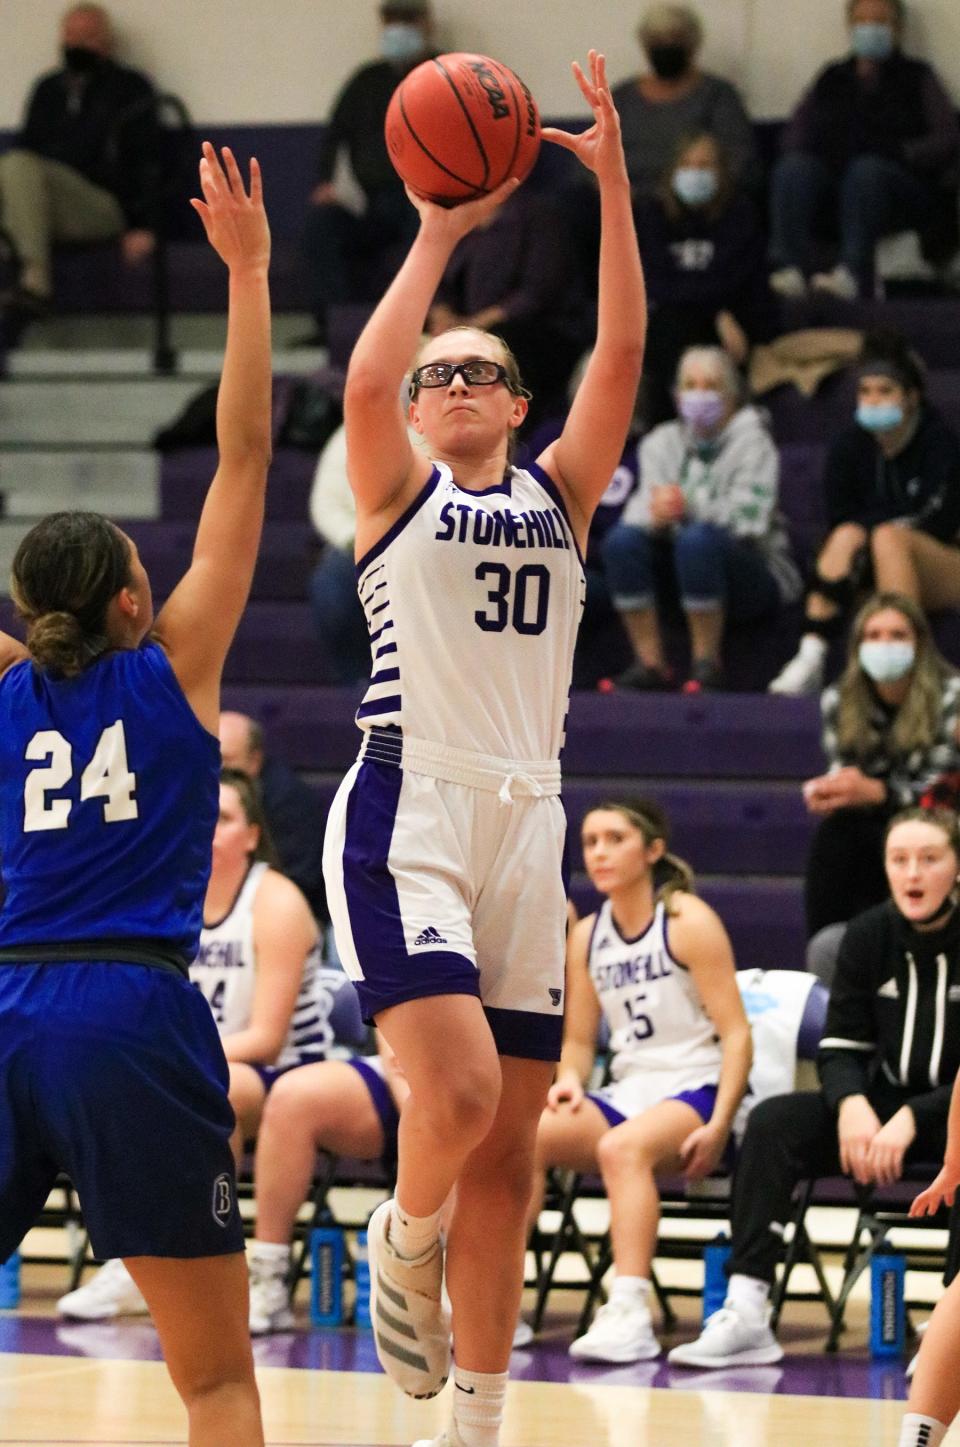 Kayla Raymond of Easton is one of the stars of the Stonehill College women's basketball team.